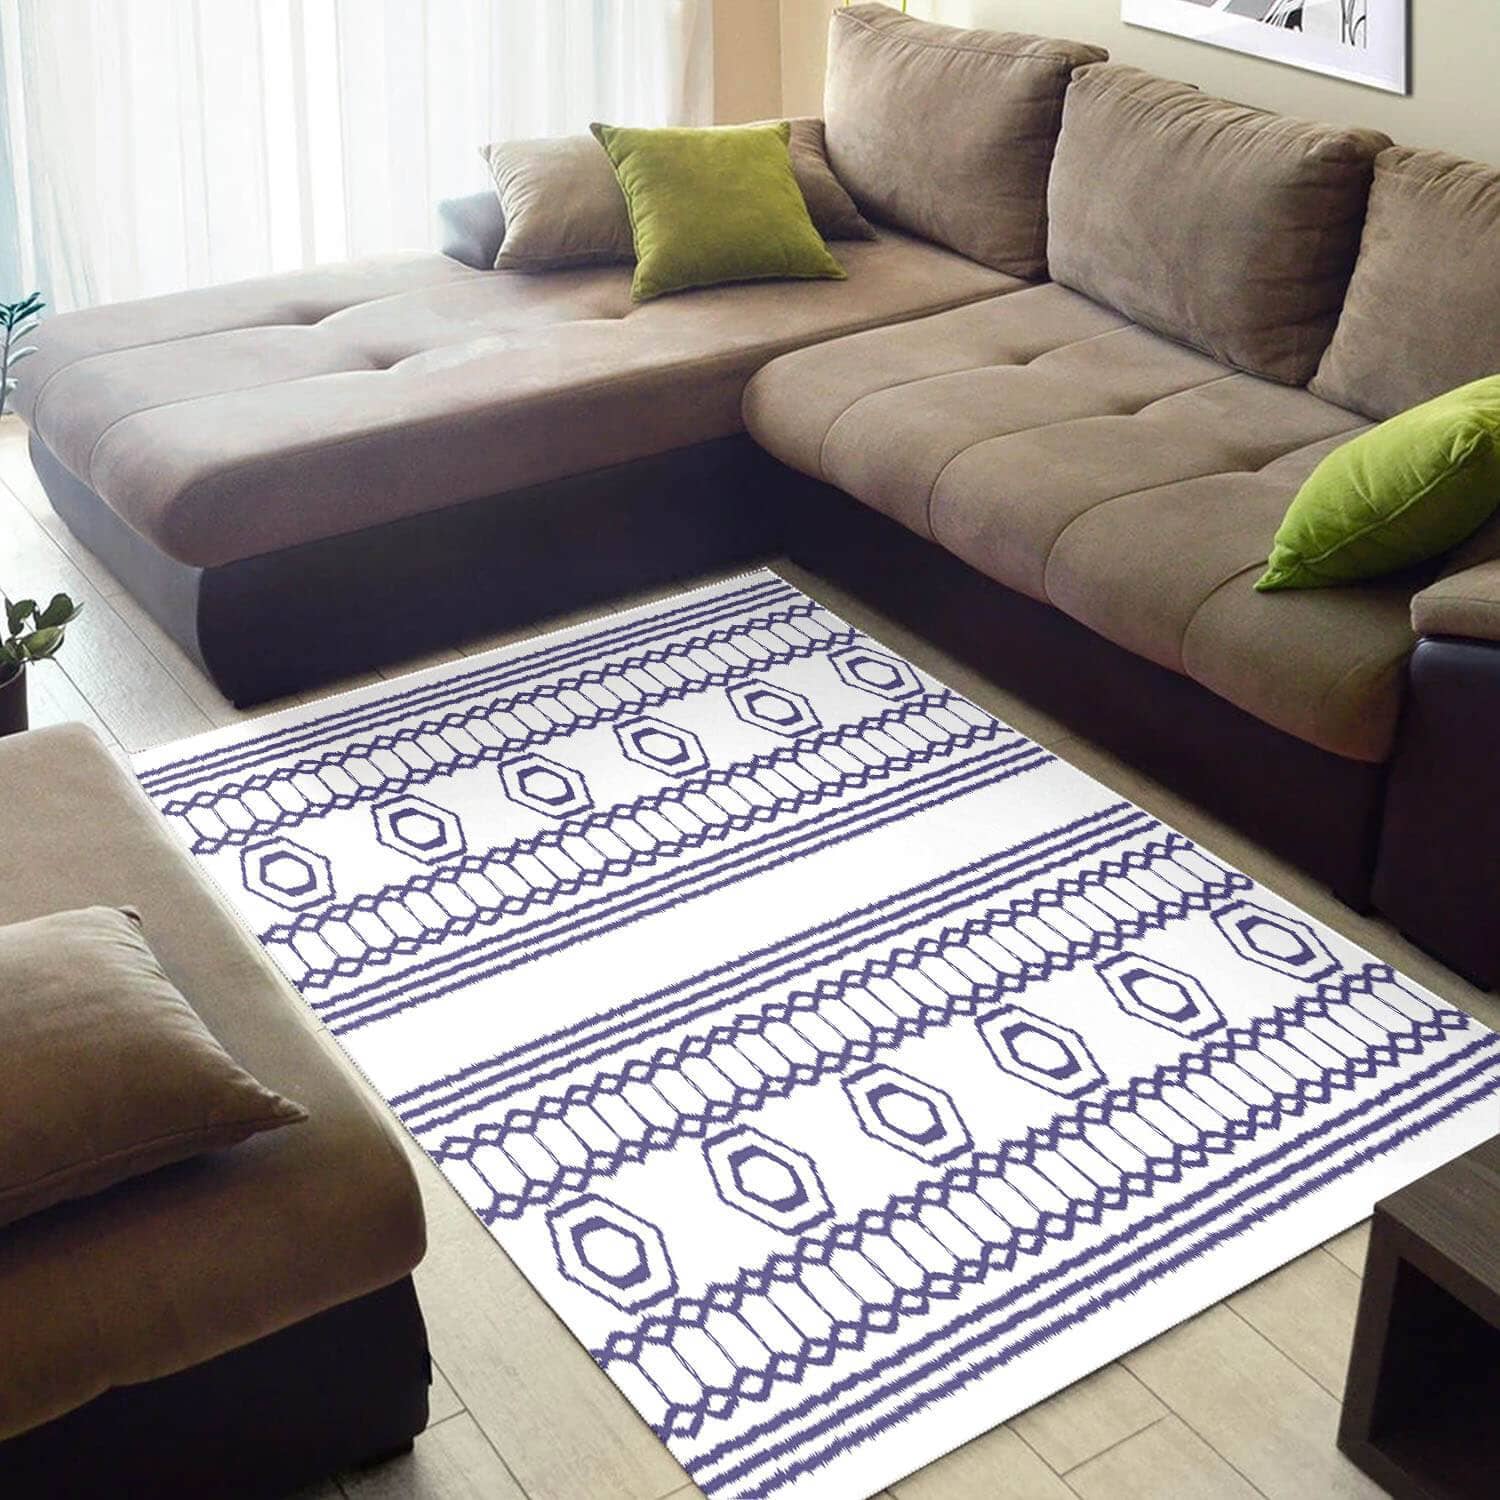 Cool African Style Colorful American Black Art Seamless Pattern Room Rug